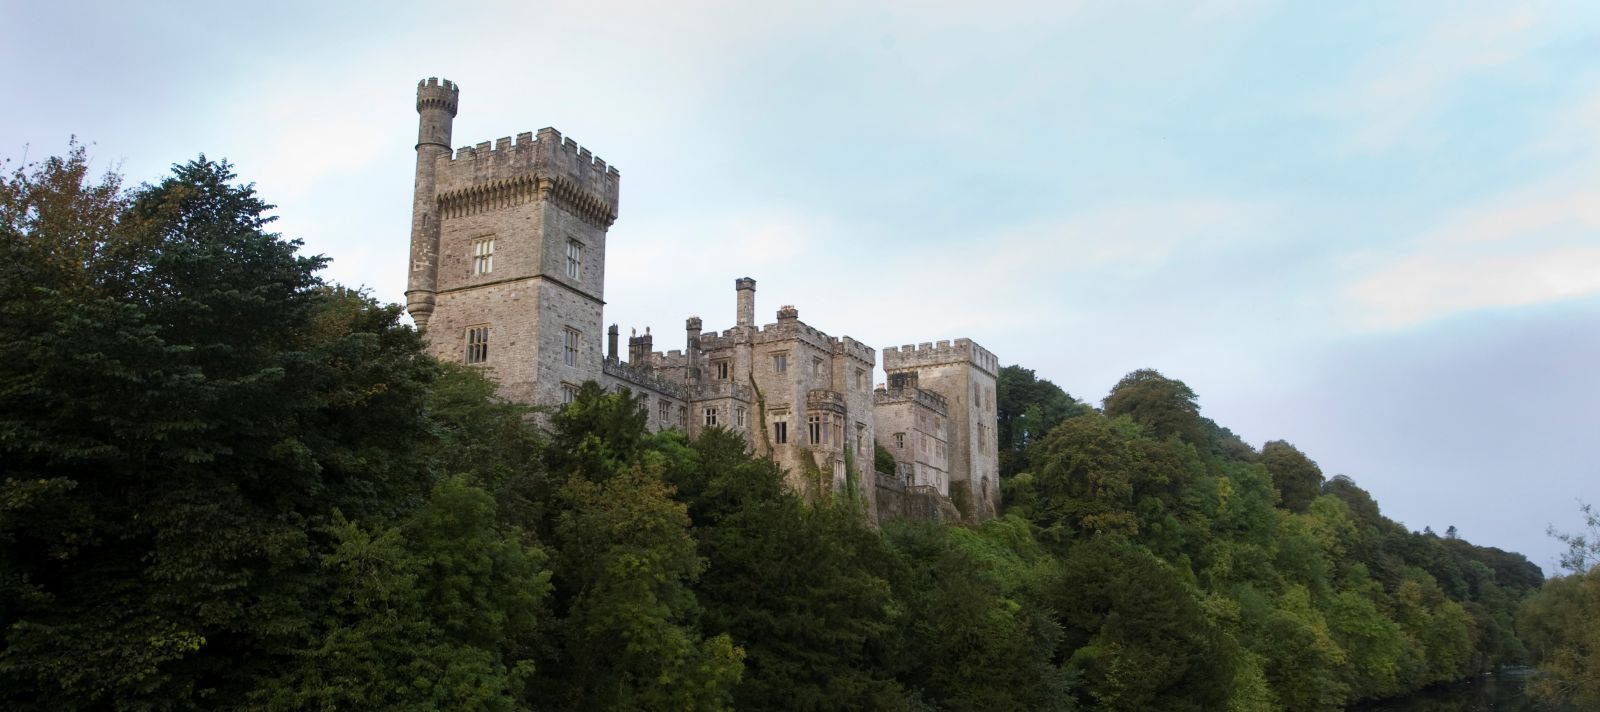 Castle by a river, accommodation by Discover Ireland Tours Destination Management Company